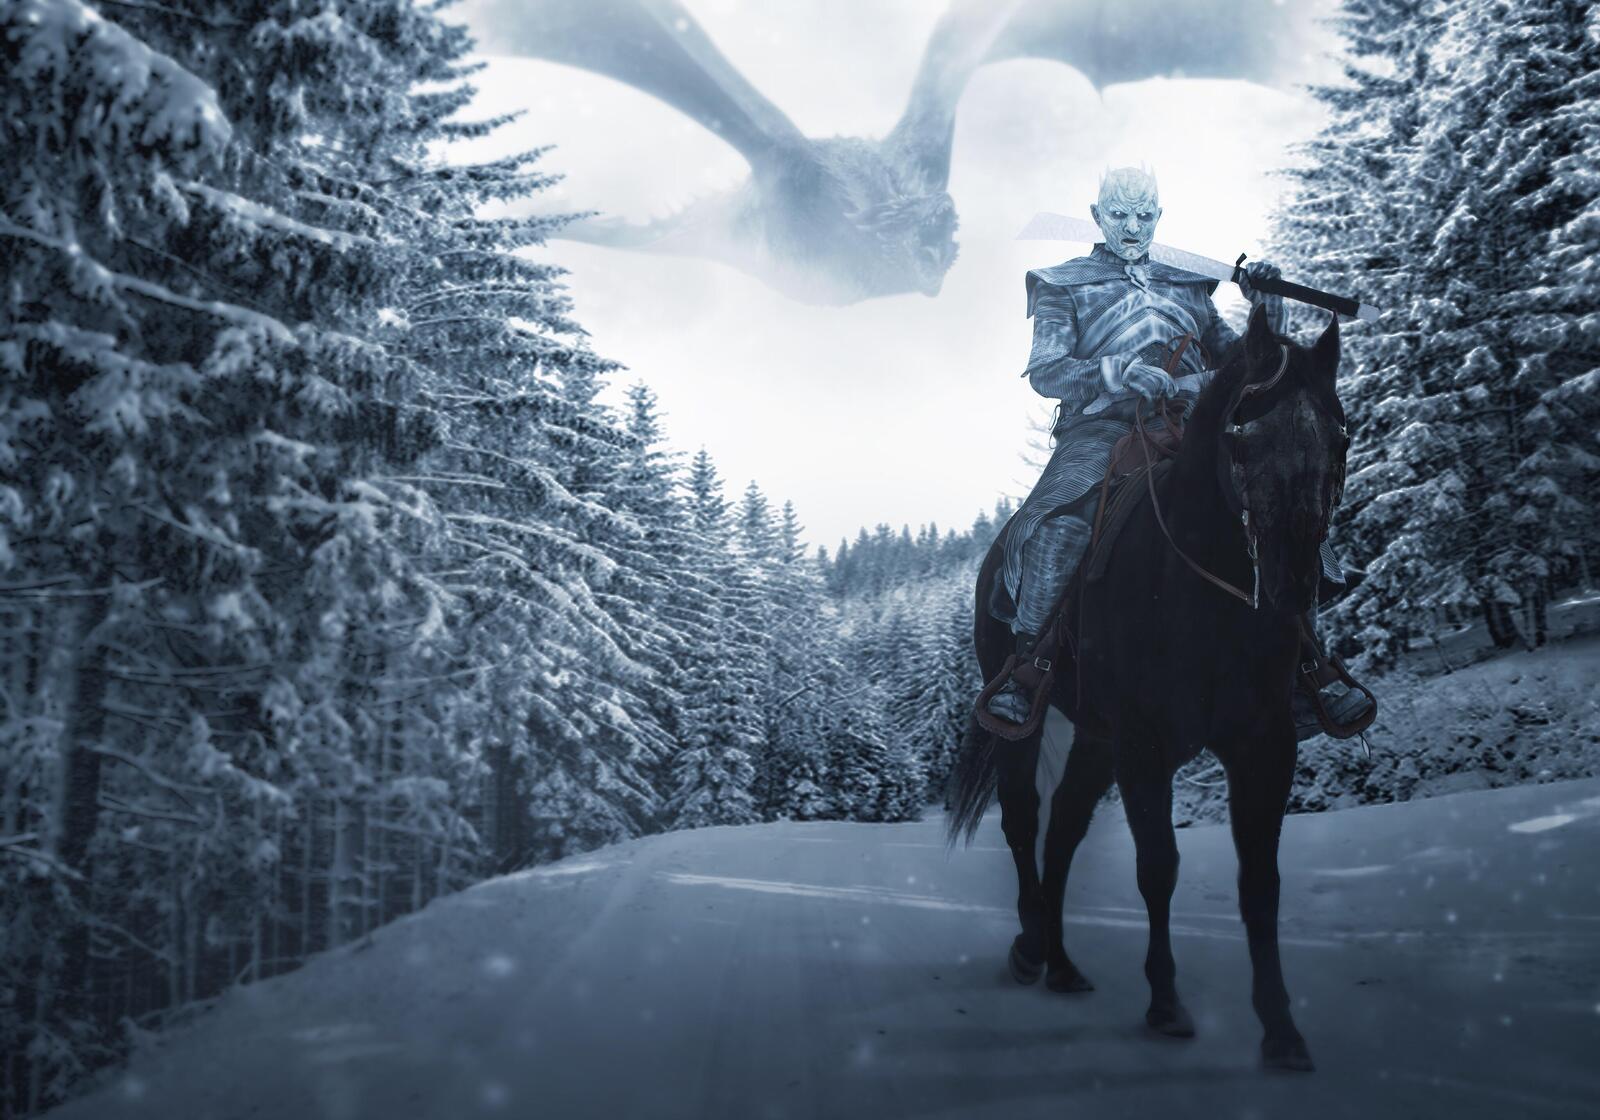 Wallpapers King of the Night White Walkers Game of Thrones on the desktop